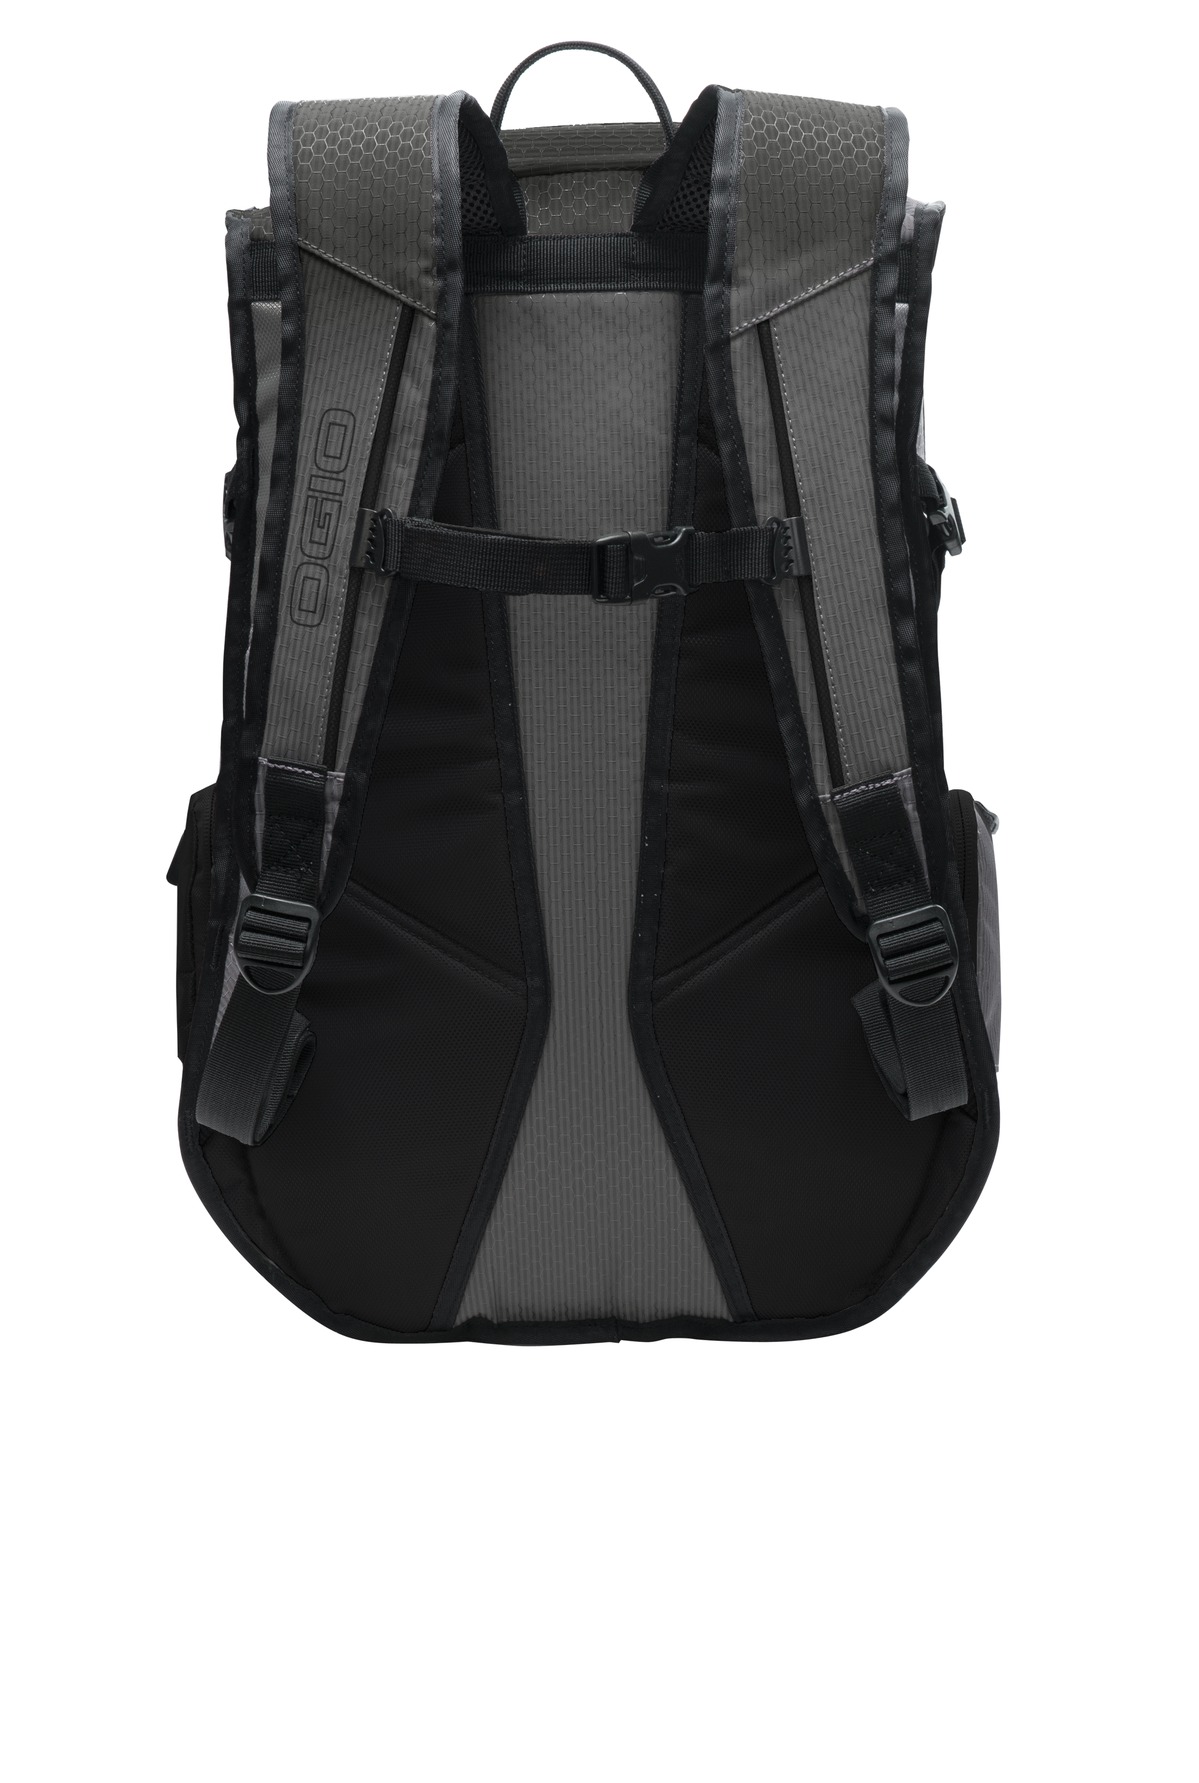 OGIO X-Fit Pack. 412039